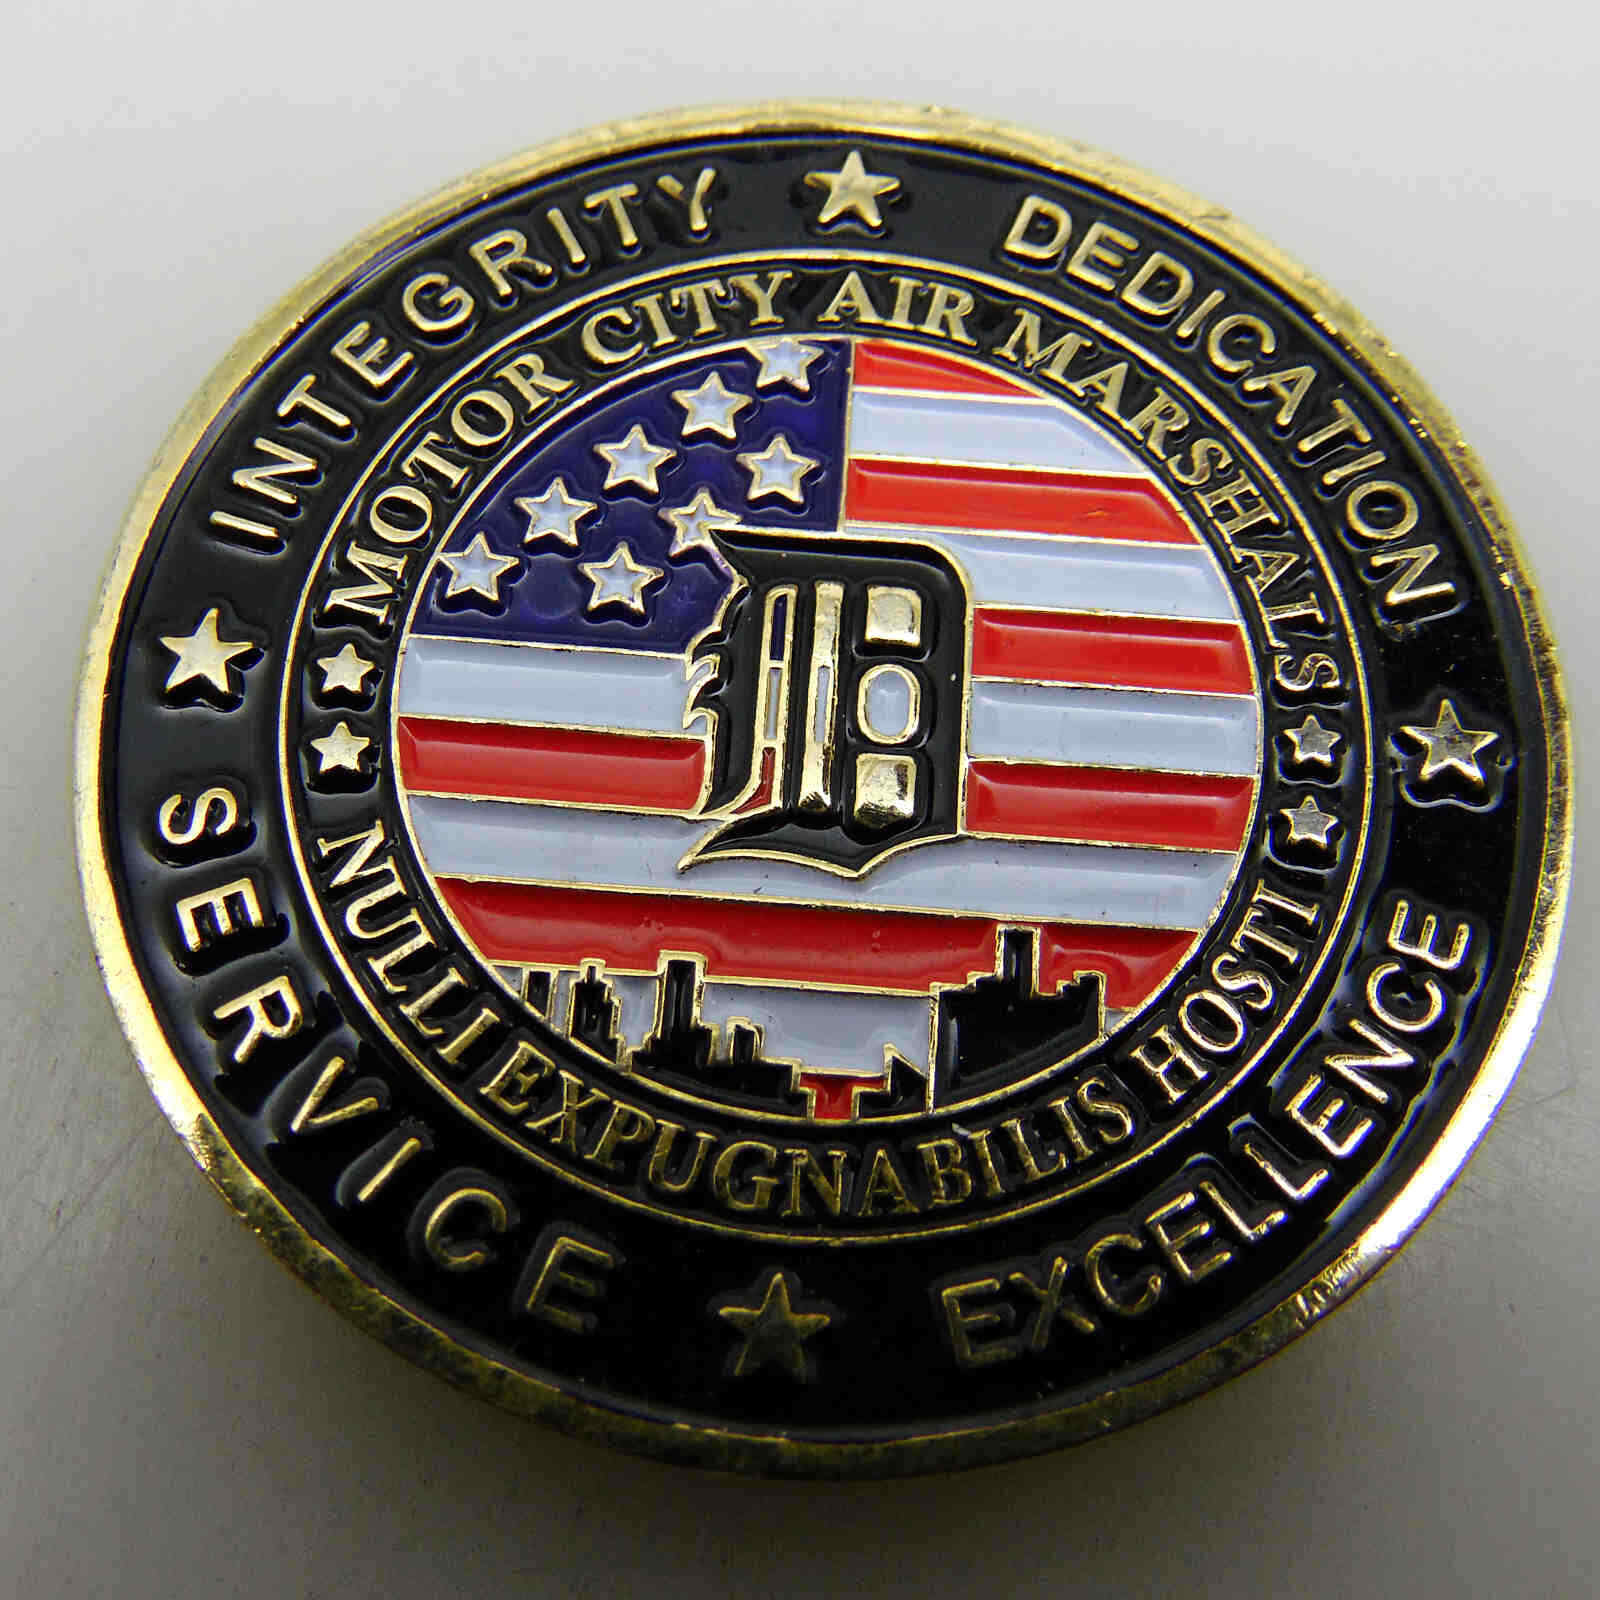 MOTOR CITY AIR MARSHALS DETROIT FIELD OFFICE CHALLENGE COIN